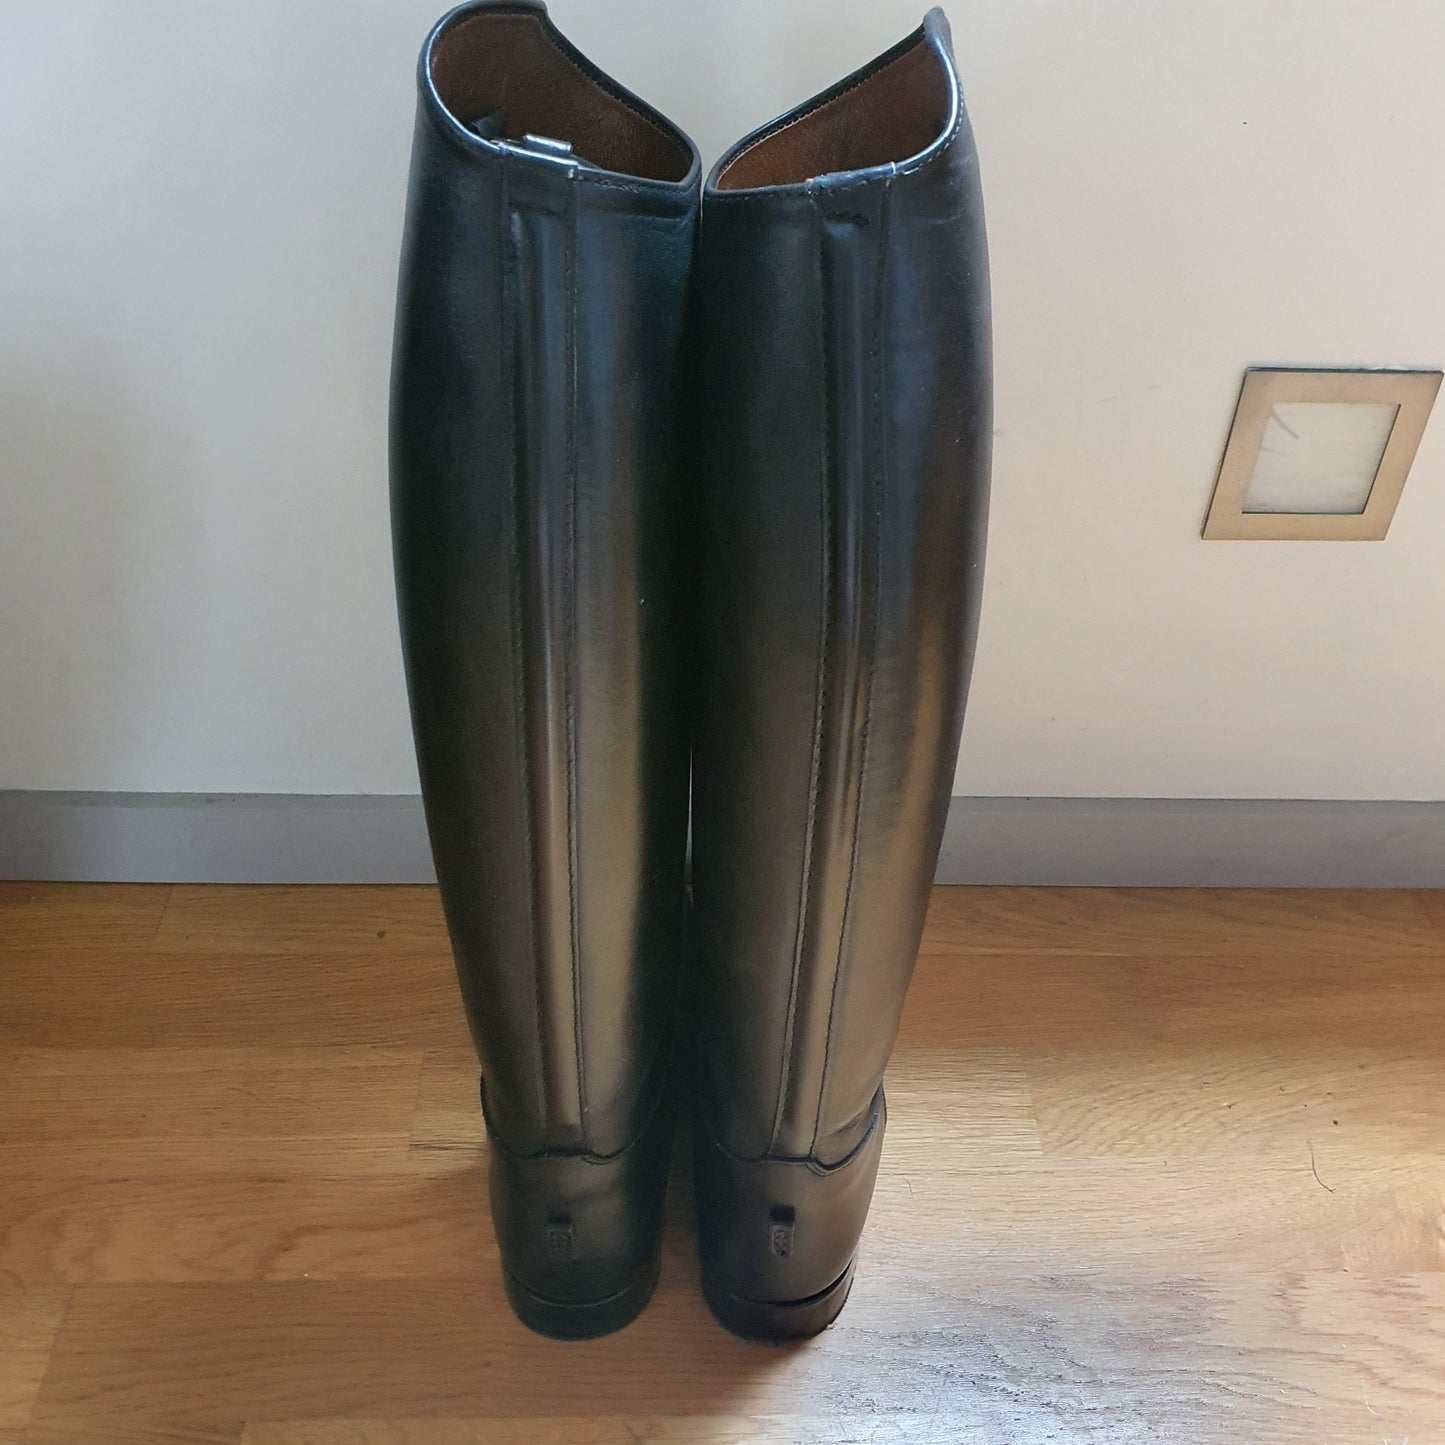 Konigs black long leather dressage / Showing riding boots size 38